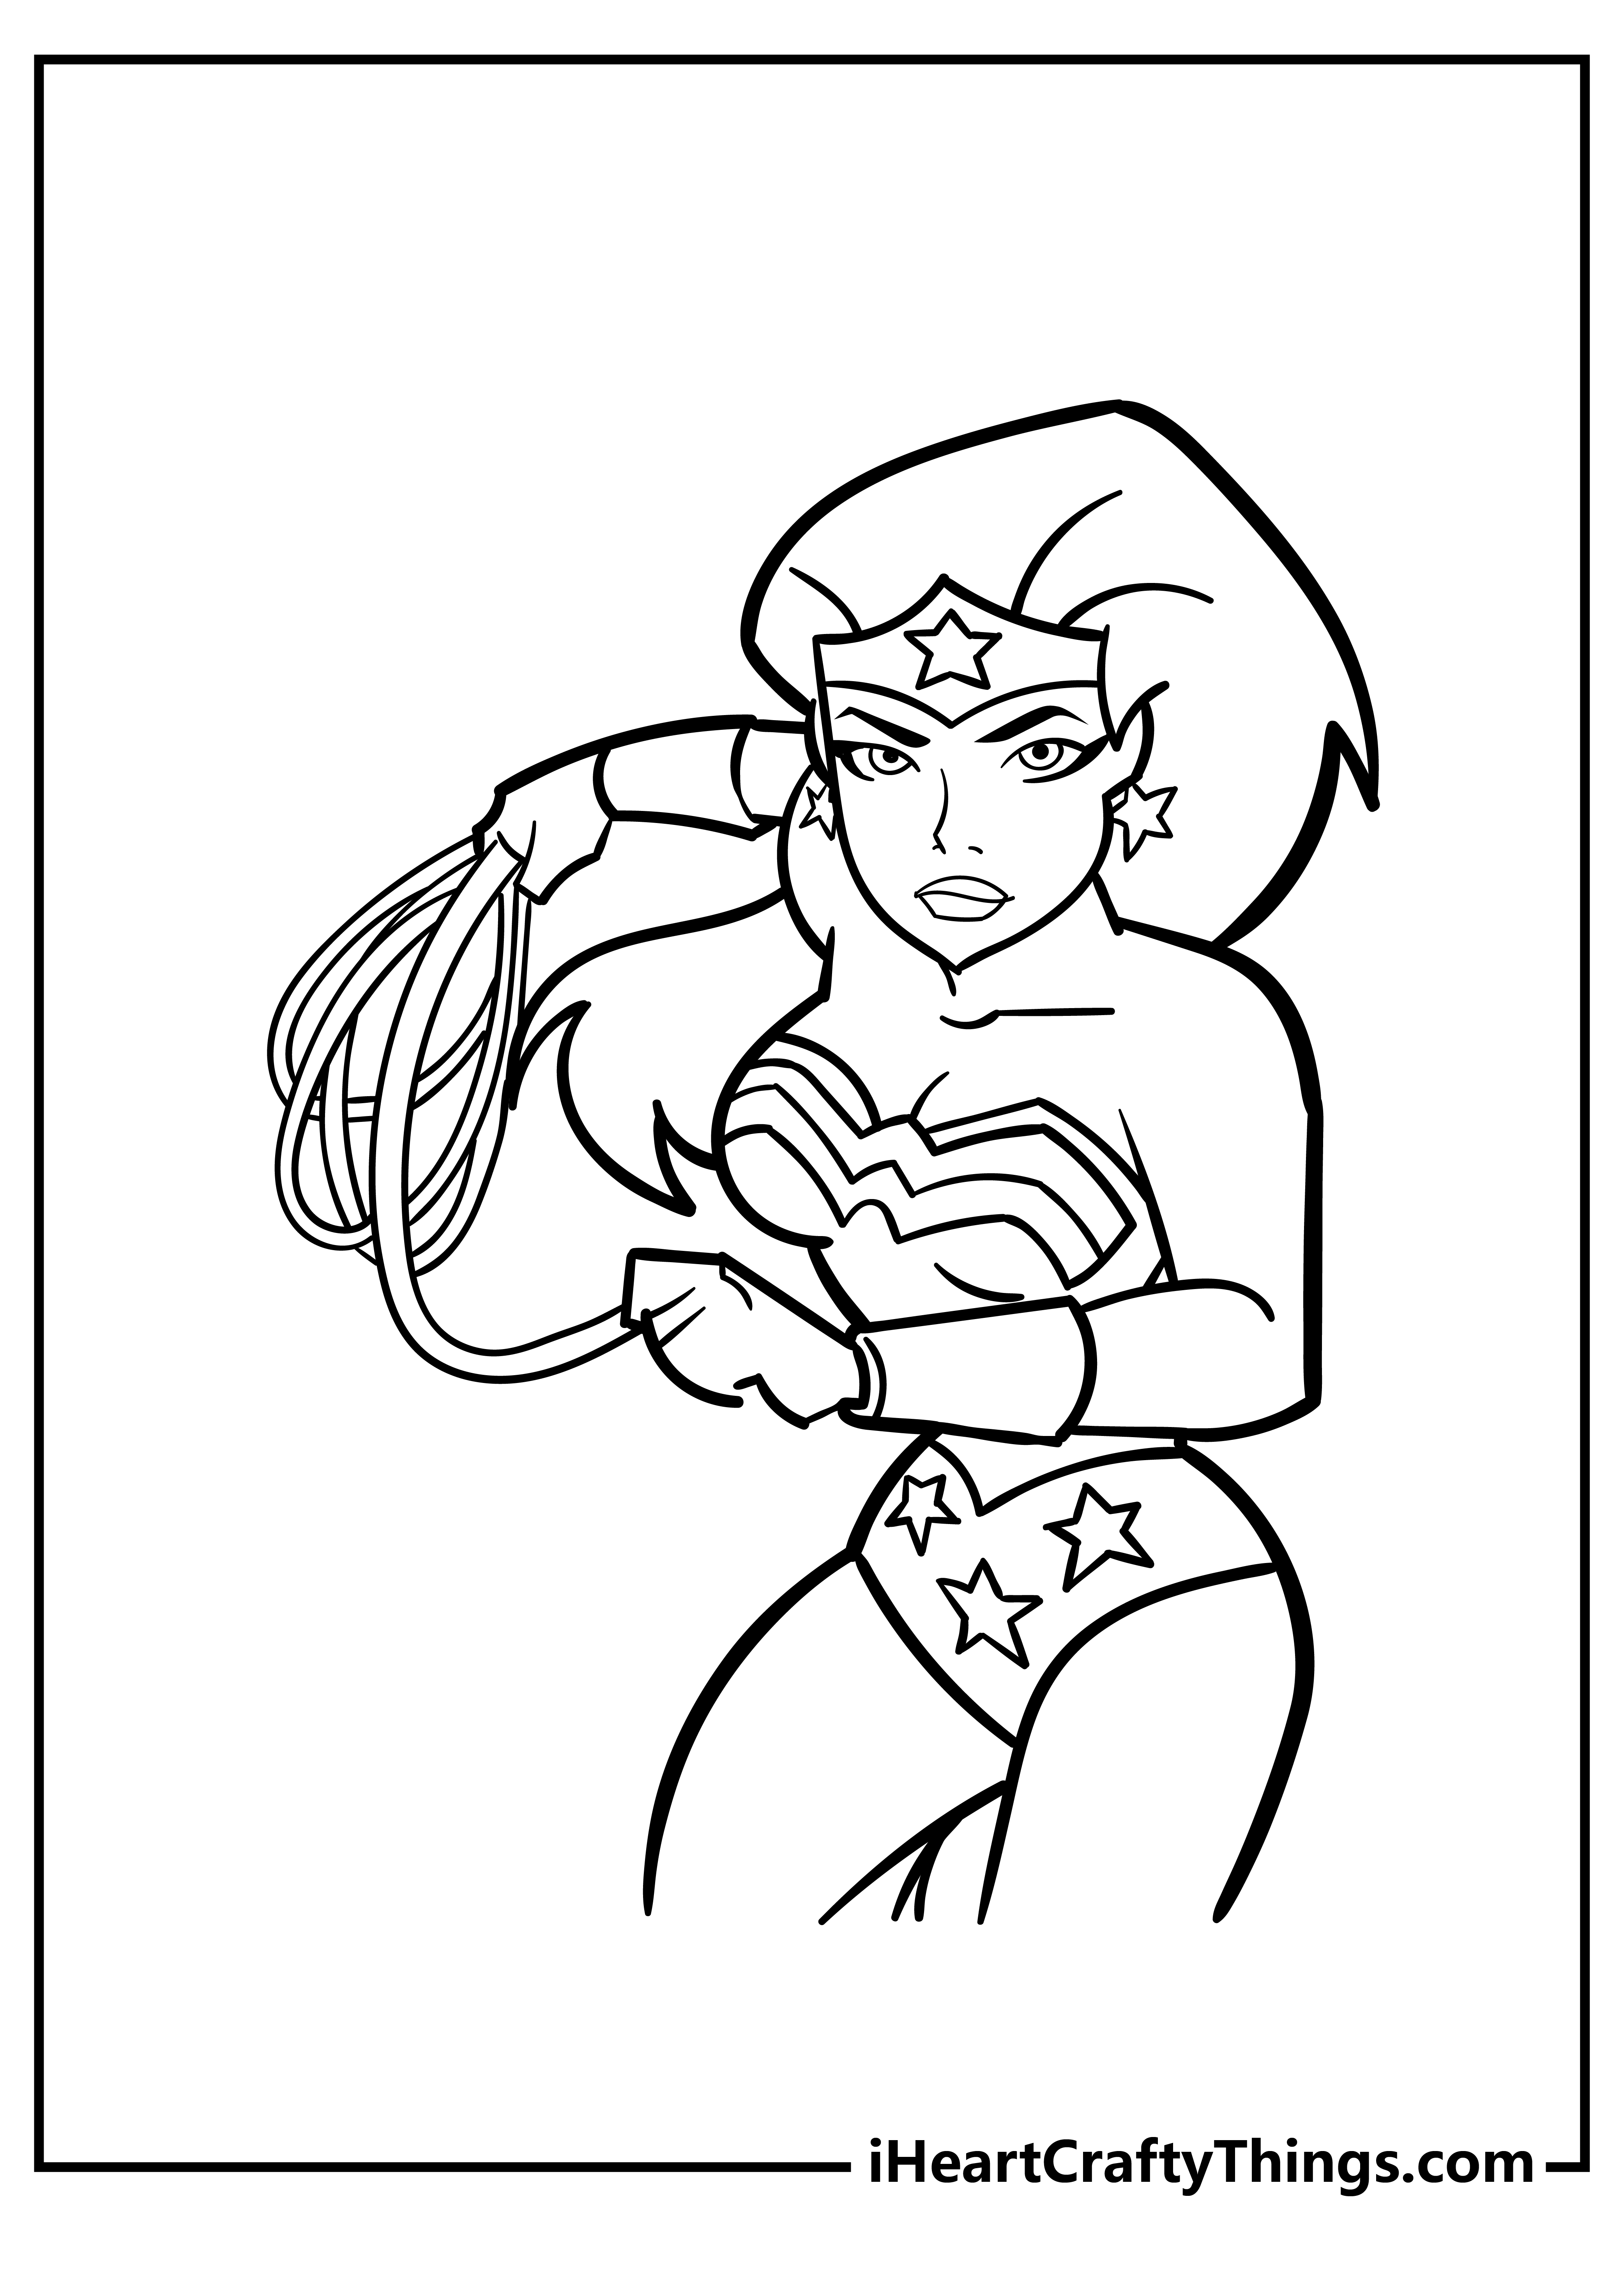 Wonder Woman Coloring Pages for preschoolers free printable